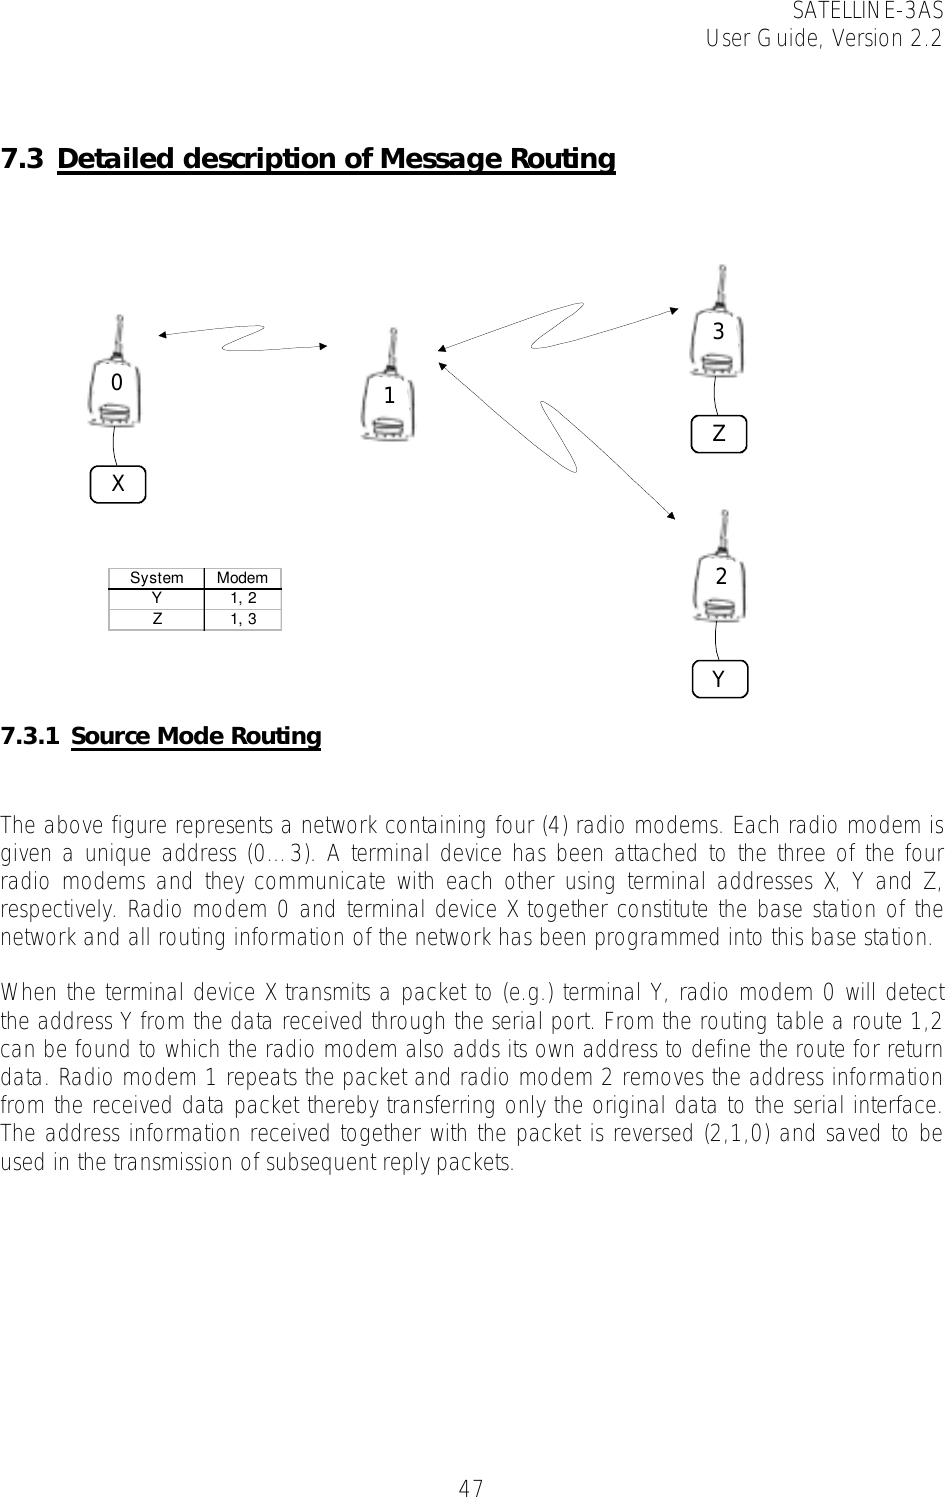 SATELLINE-3AS User Guide, Version 2.2   47  7.3 Detailed description of Message Routing   7.3.1 Source Mode Routing   The above figure represents a network containing four (4) radio modems. Each radio modem is given a unique address (0…3). A terminal device has been attached to the three of the four radio modems and they communicate with each other using terminal addresses X, Y and Z, respectively. Radio modem 0 and terminal device X together constitute the base station of the network and all routing information of the network has been programmed into this base station.   When the terminal device X transmits a packet to (e.g.) terminal Y, radio modem 0 will detect the address Y from the data received through the serial port. From the routing table a route 1,2 can be found to which the radio modem also adds its own address to define the route for return data. Radio modem 1 repeats the packet and radio modem 2 removes the address information from the received data packet thereby transferring only the original data to the serial interface. The address information received together with the packet is reversed (2,1,0) and saved to be used in the transmission of subsequent reply packets.   0132XYZSystem ModemY1, 2Z1, 3